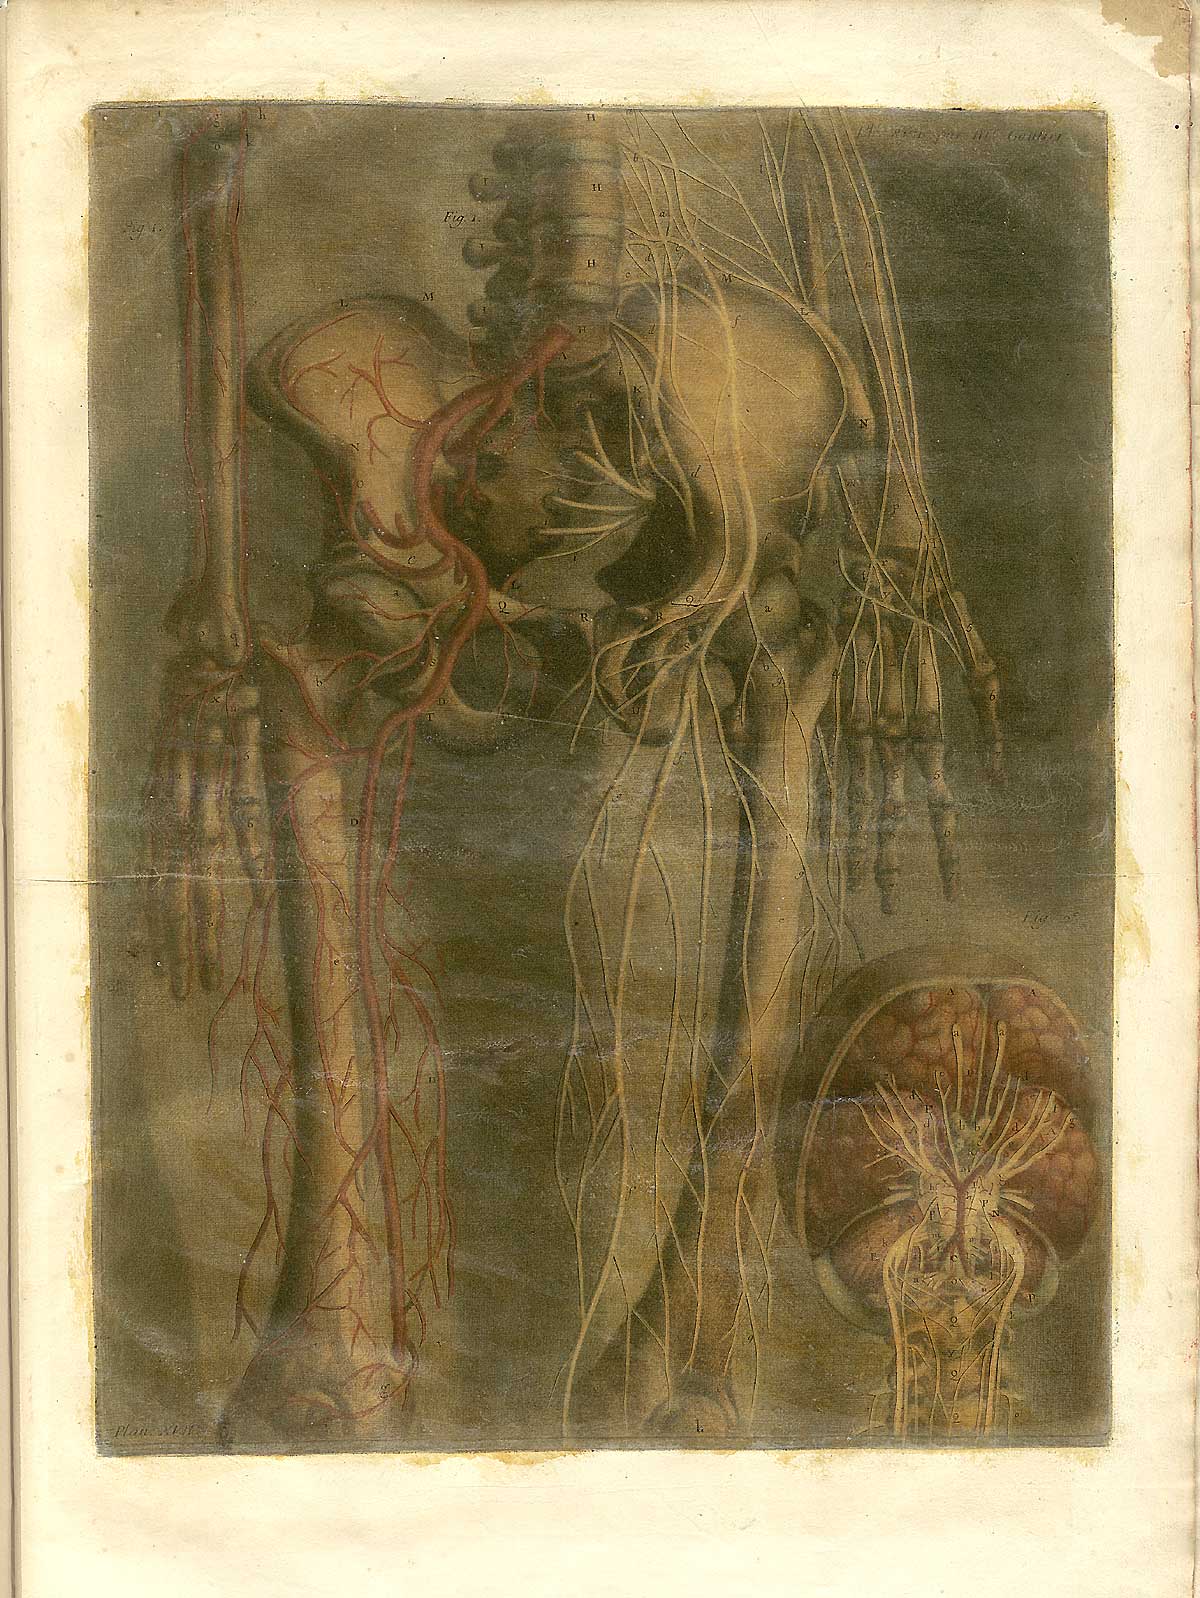 Color mezzotint of a facing skeleton from the top of the pelvis to about the knee joint with views of the hand bones as well and a brain in the lower right hand corner; the view is from the front; from Jacques Fabian Gautier d’Agoty’s Anatomie générale des viscères en situation, NLM Call no.: WZ 260 G283c 1745.